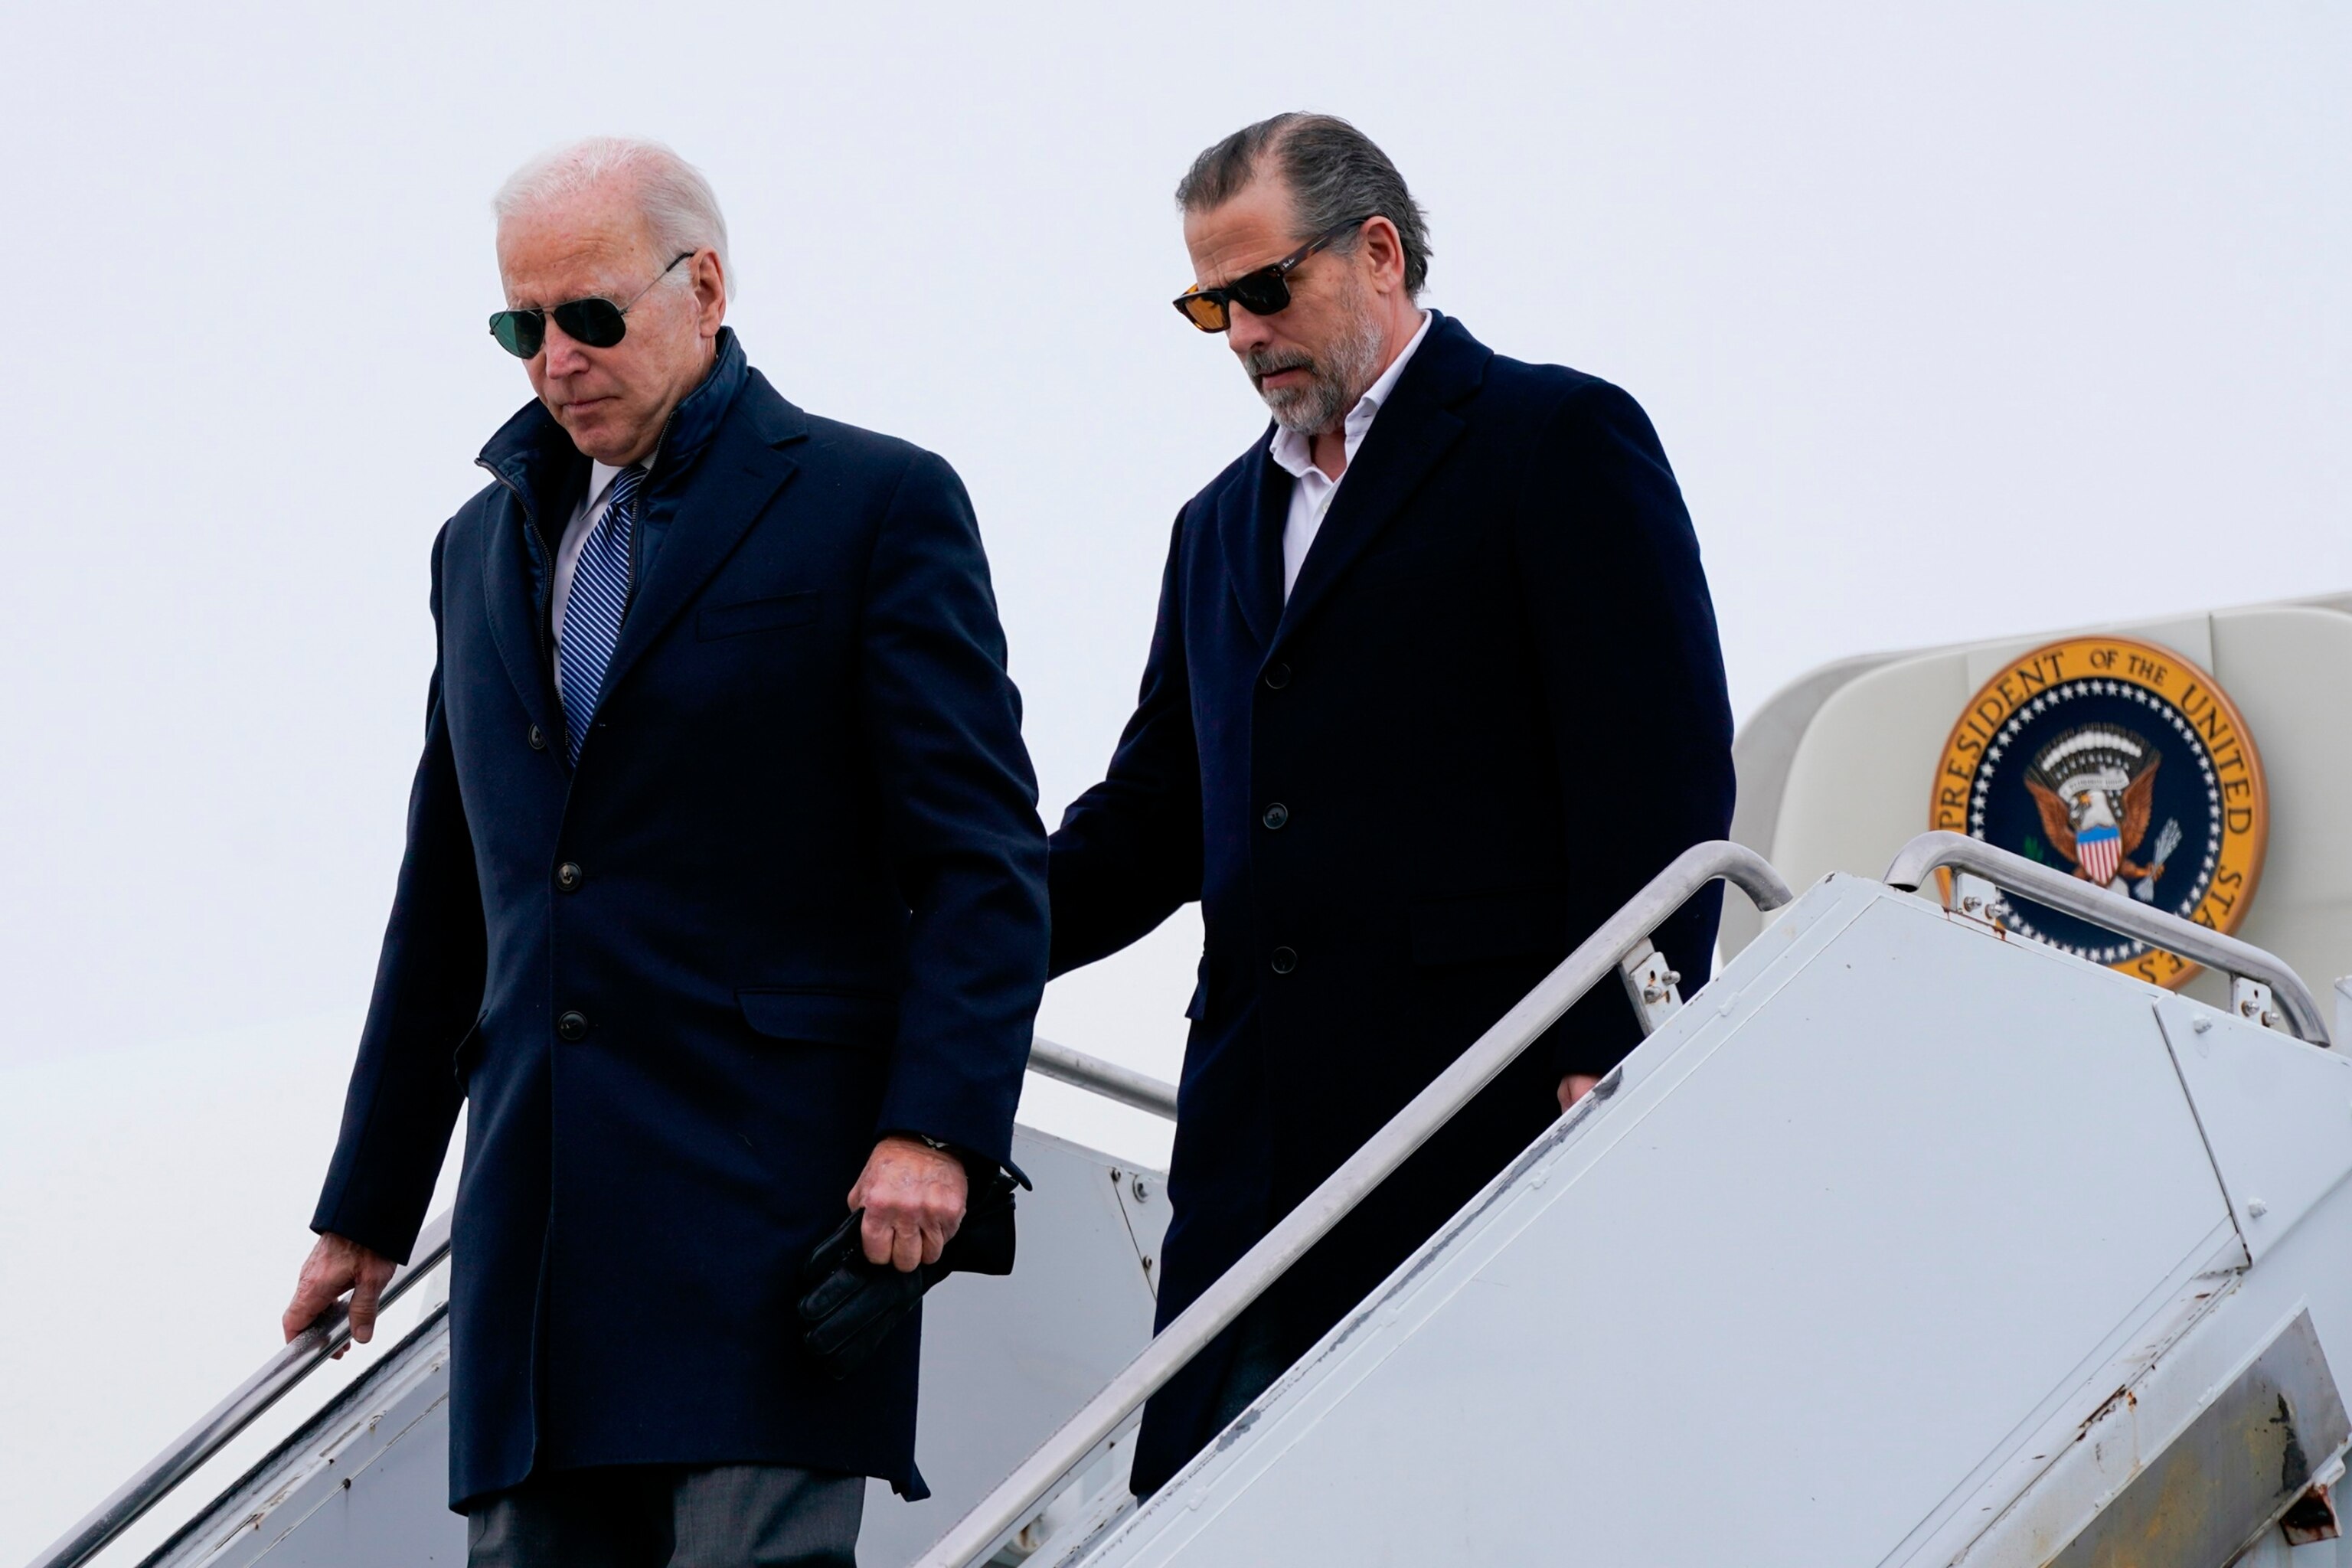 PHOTO: In this Feb. 4, 2023, file photo, President Joe Biden and his son, Hunter Biden, step off Air Force One, at Hancock Field Air National Guard Base in Syracuse, N.Y.